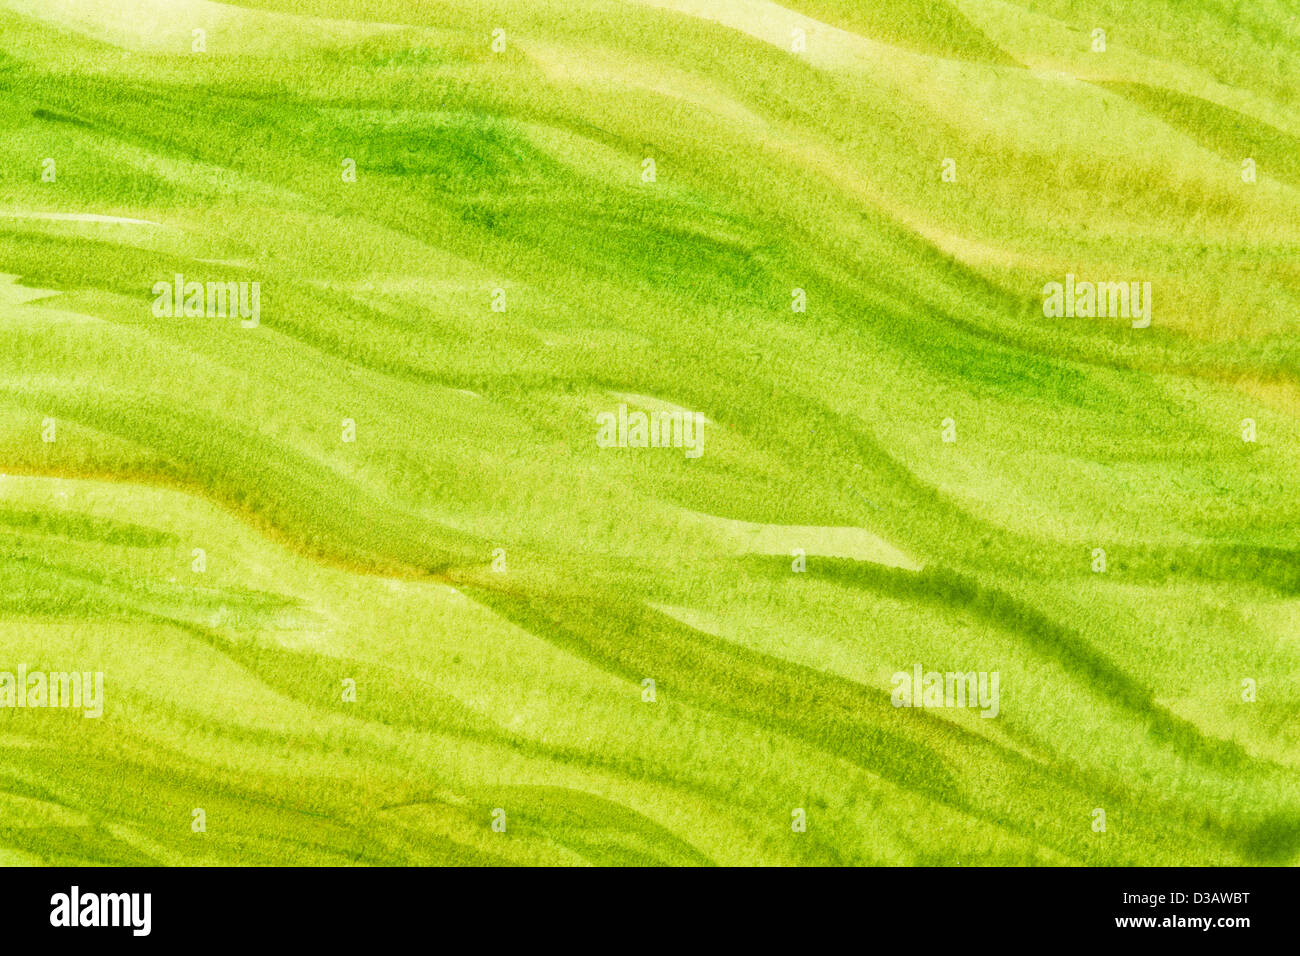 green and yellow vibrant watercolor paper texture with wavy brush strokes Stock Photo